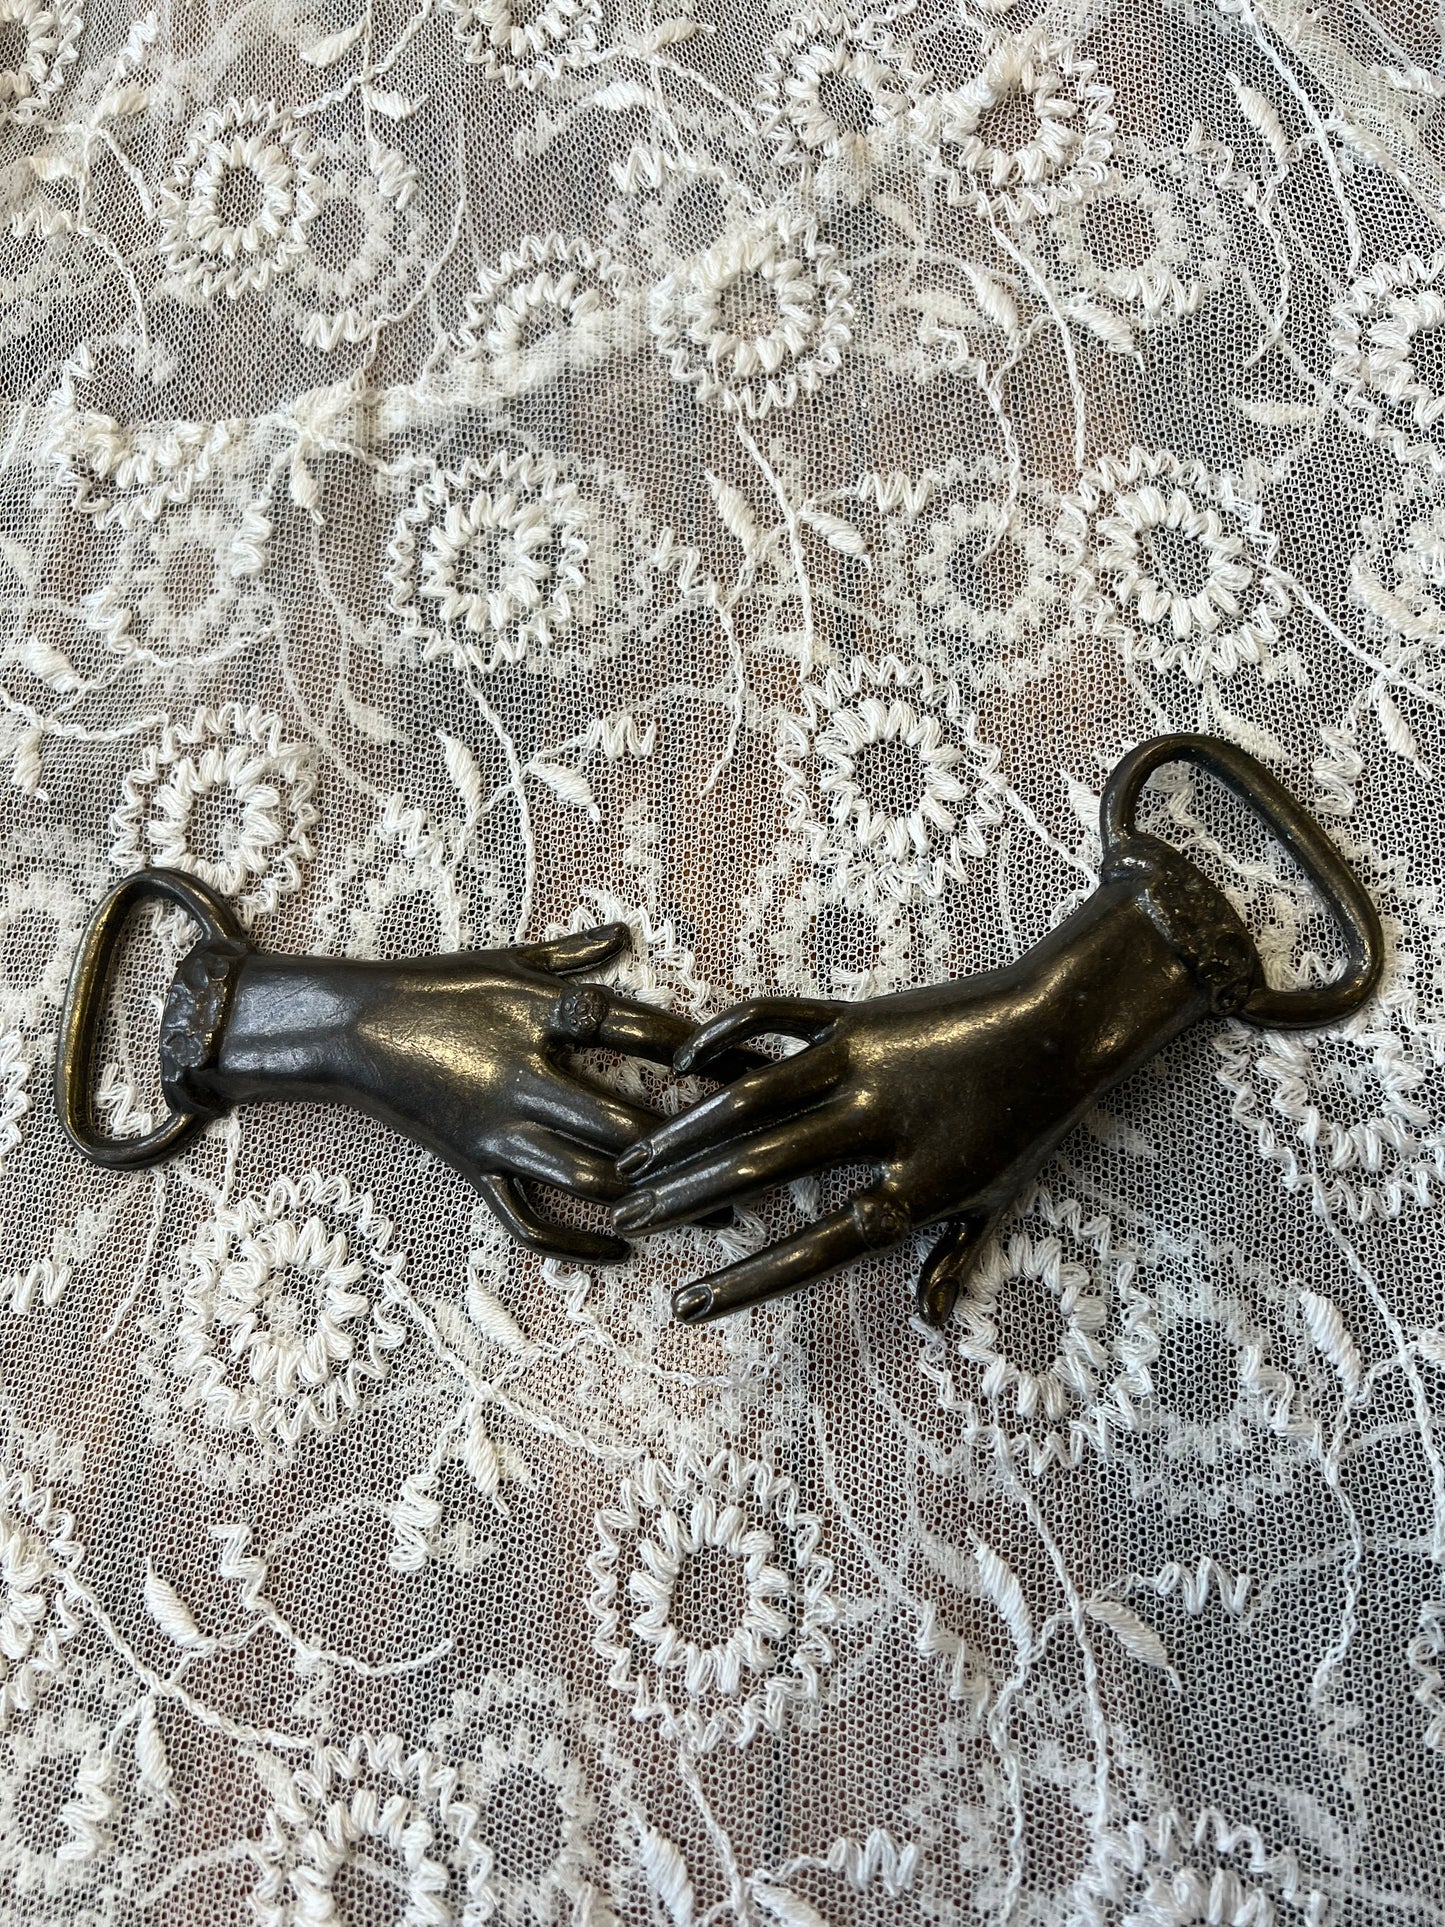 1970s Victorian Clasping Hands Belt Buckle